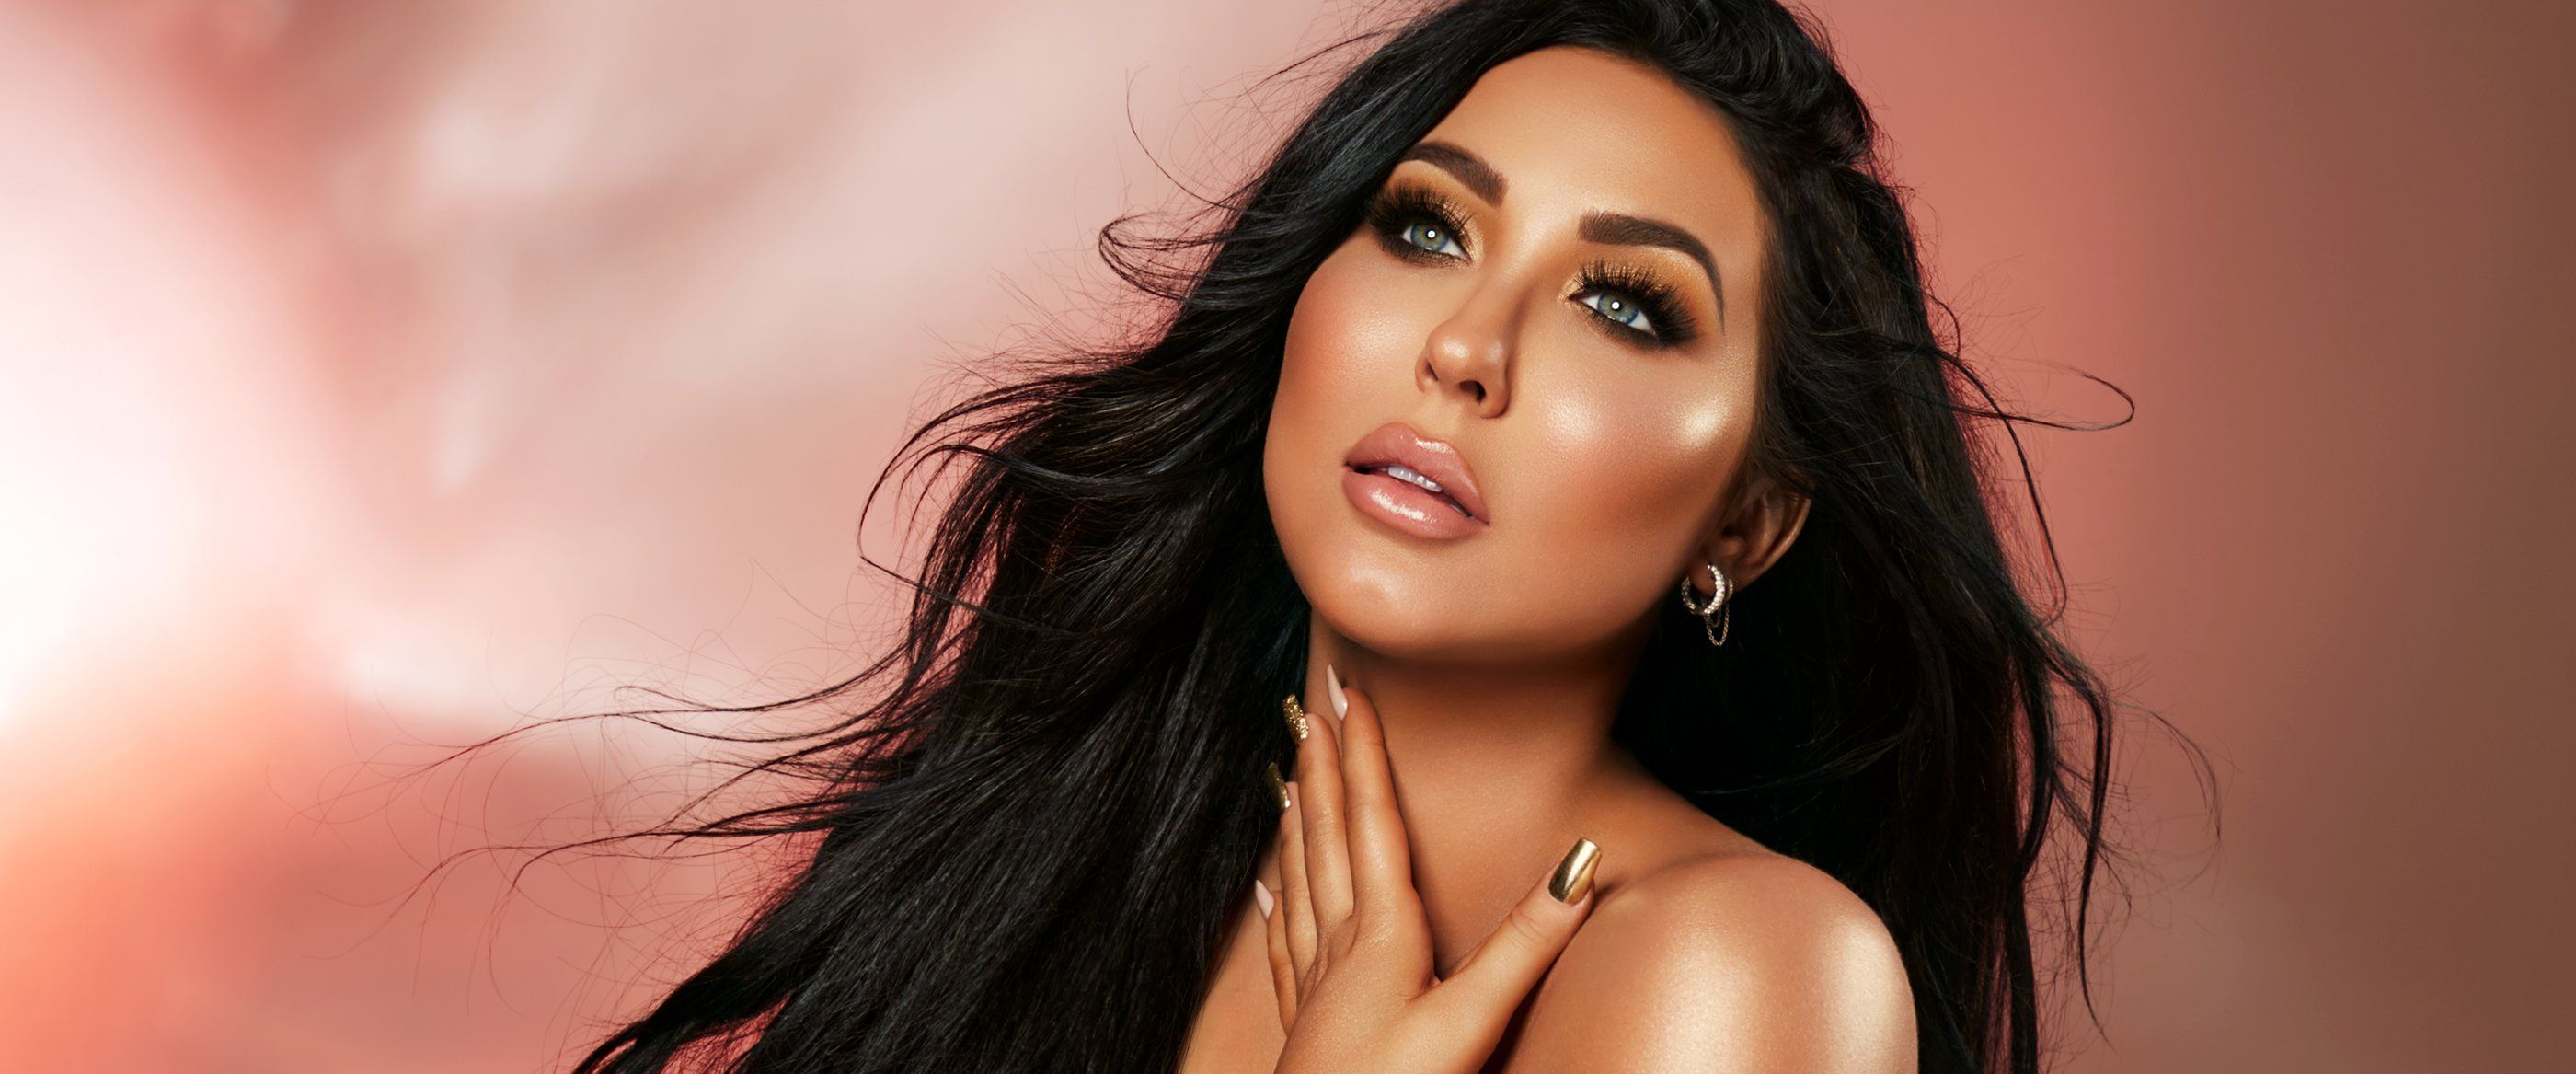 Jaclyn Hill Cosmetics Officially Closes